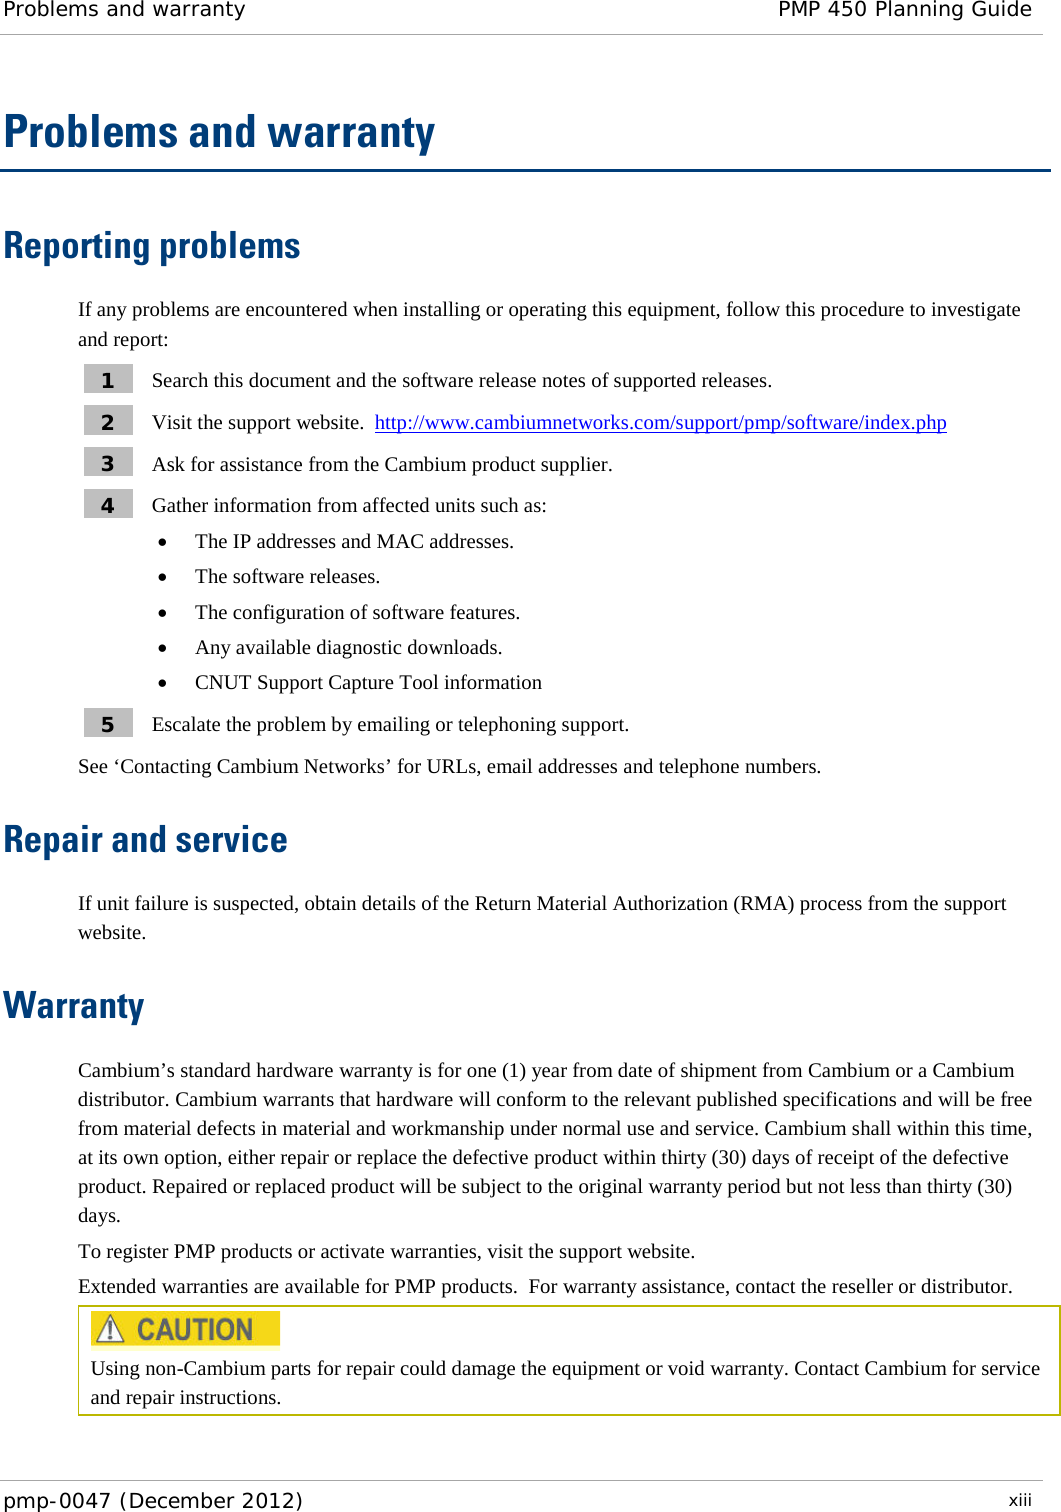 Problems and warranty PMP 450 Planning Guide  pmp-0047 (December 2012)  xiii  Problems and warranty Reporting problems If any problems are encountered when installing or operating this equipment, follow this procedure to investigate and report: 1  Search this document and the software release notes of supported releases. 2  Visit the support website.  http://www.cambiumnetworks.com/support/pmp/software/index.php  3  Ask for assistance from the Cambium product supplier. 4  Gather information from affected units such as: • The IP addresses and MAC addresses. • The software releases. • The configuration of software features. • Any available diagnostic downloads. • CNUT Support Capture Tool information 5  Escalate the problem by emailing or telephoning support. See ‘Contacting Cambium Networks’ for URLs, email addresses and telephone numbers. Repair and service If unit failure is suspected, obtain details of the Return Material Authorization (RMA) process from the support website. Warranty Cambium’s standard hardware warranty is for one (1) year from date of shipment from Cambium or a Cambium distributor. Cambium warrants that hardware will conform to the relevant published specifications and will be free from material defects in material and workmanship under normal use and service. Cambium shall within this time, at its own option, either repair or replace the defective product within thirty (30) days of receipt of the defective product. Repaired or replaced product will be subject to the original warranty period but not less than thirty (30) days. To register PMP products or activate warranties, visit the support website. Extended warranties are available for PMP products.  For warranty assistance, contact the reseller or distributor.  Using non-Cambium parts for repair could damage the equipment or void warranty. Contact Cambium for service and repair instructions.  